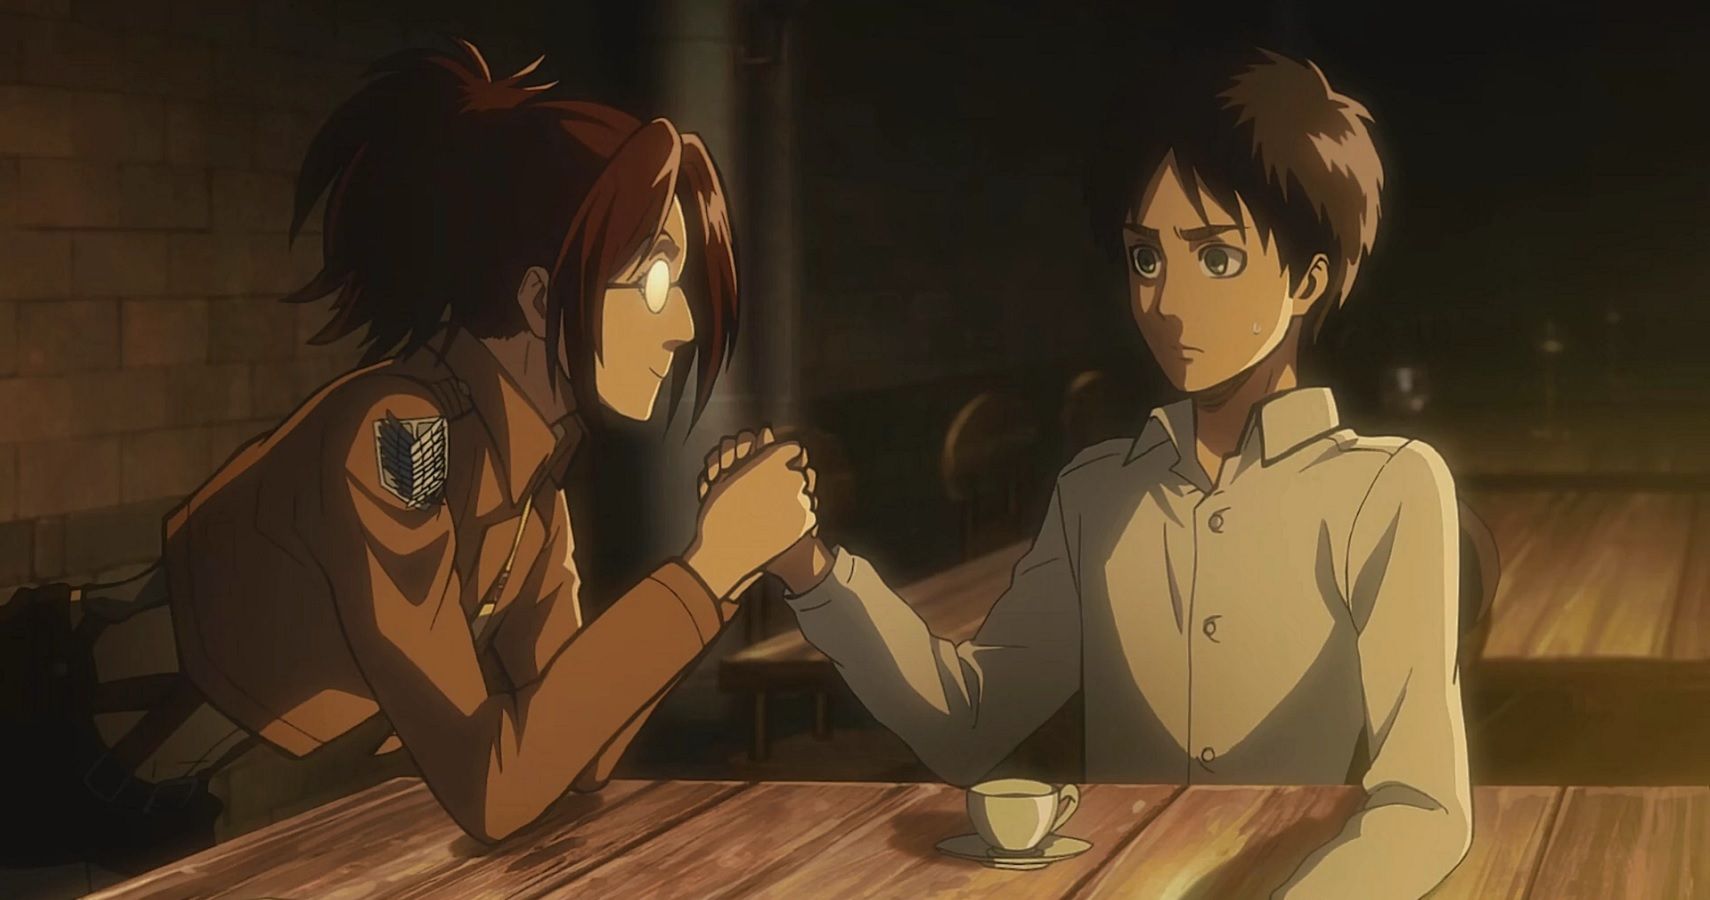 What is Hanji's and Armin's gender? - Quora